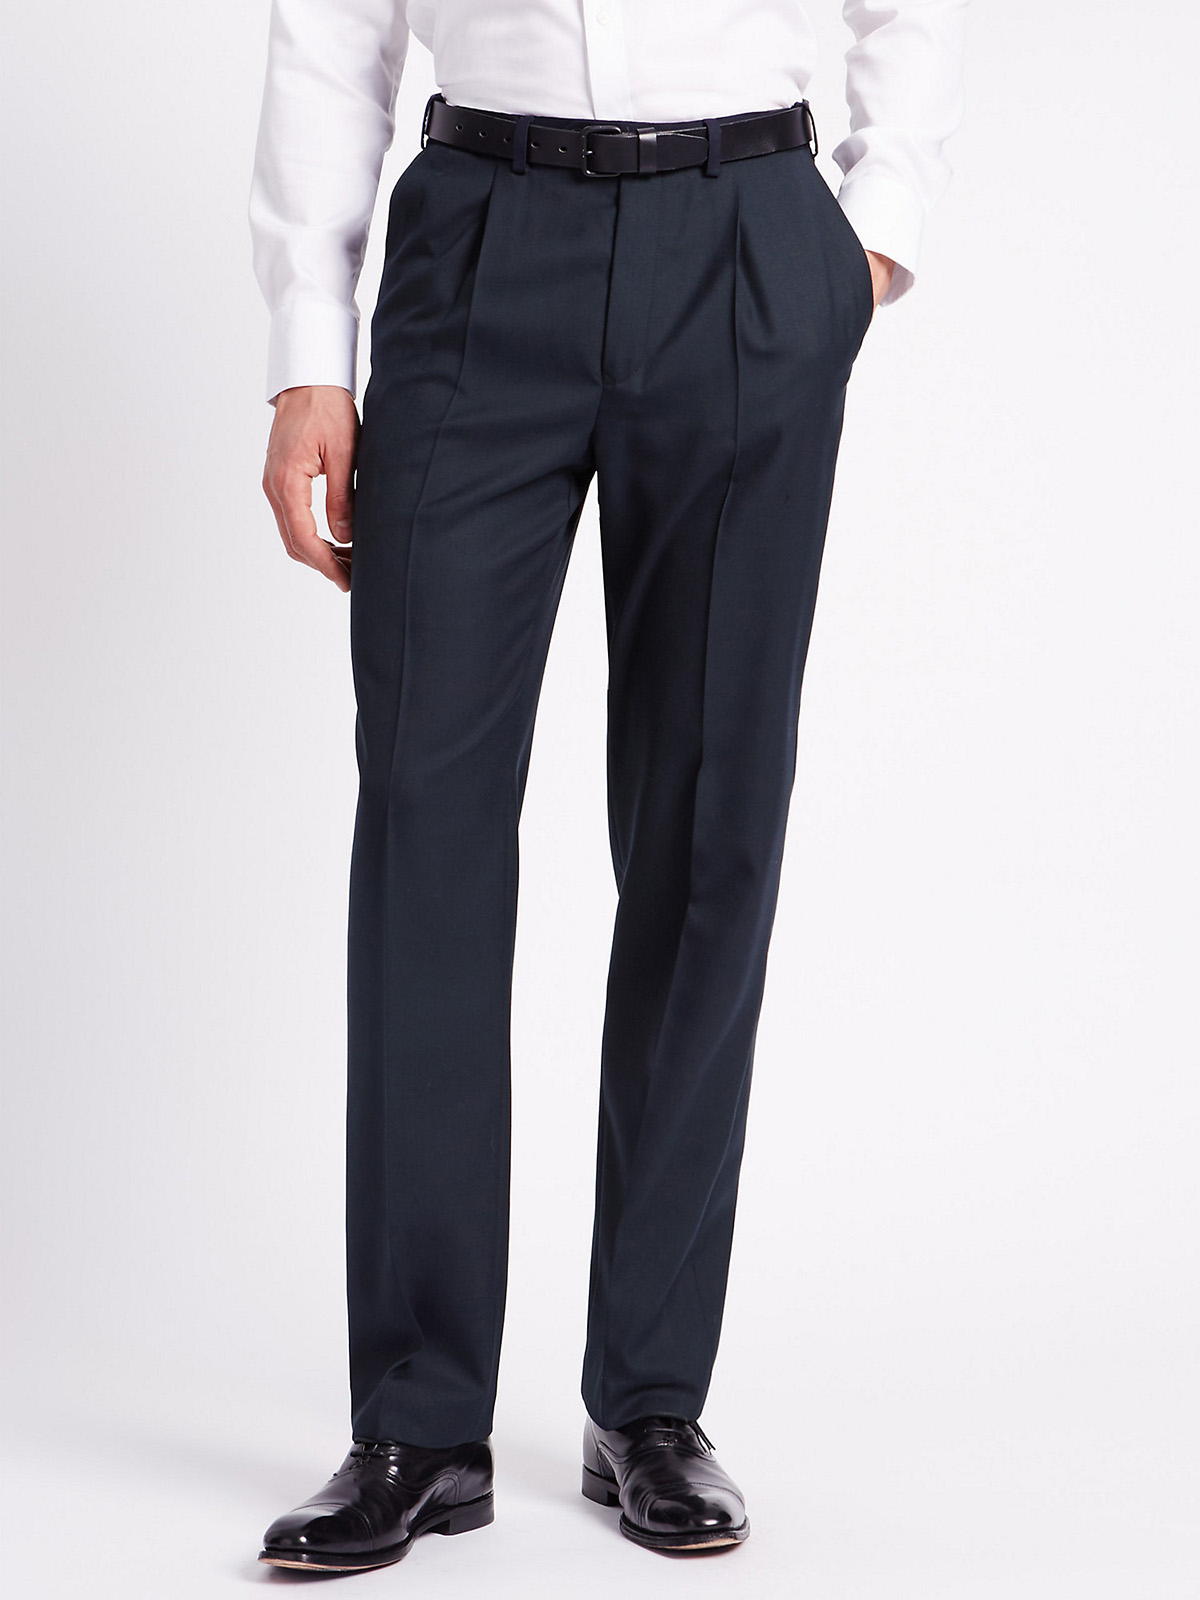 Marks and Spencer - - M&5 NAVY Mens Single Pleat Trousers with Wool ...